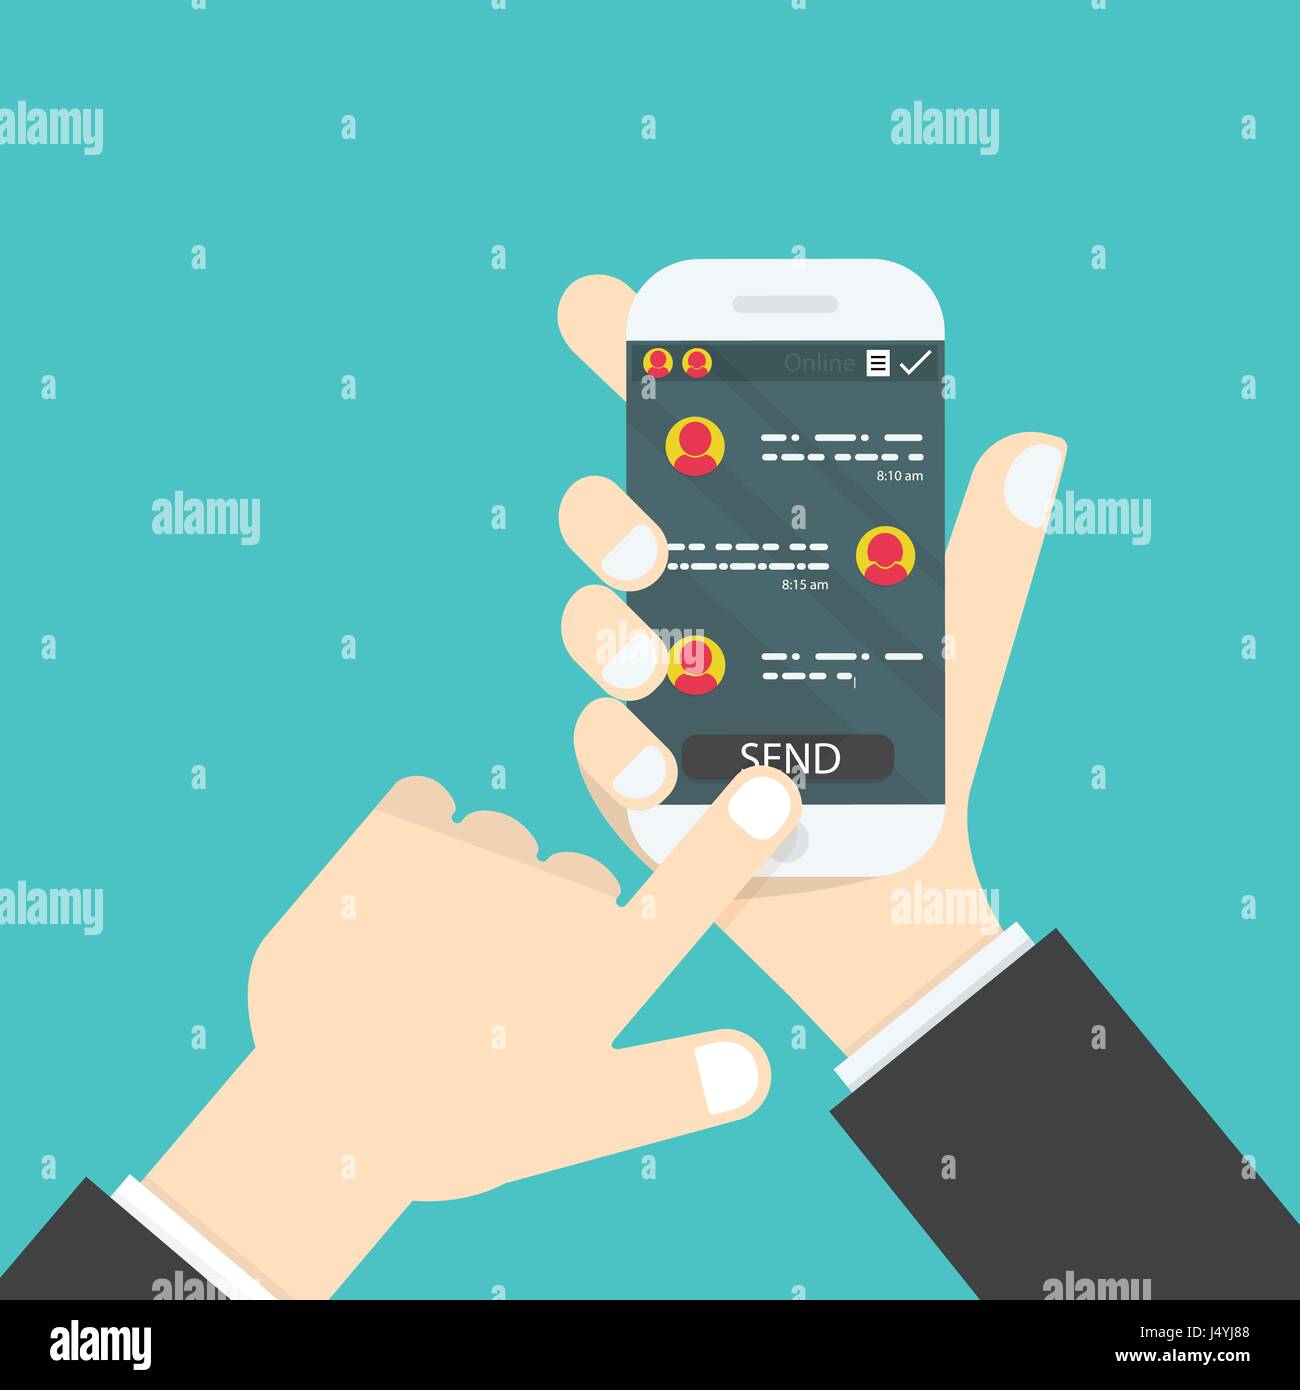 Hand holding mobile phone.Social network concept.Messenger window.Chating,line and messaging concept.Vector illustration. Stock Vector